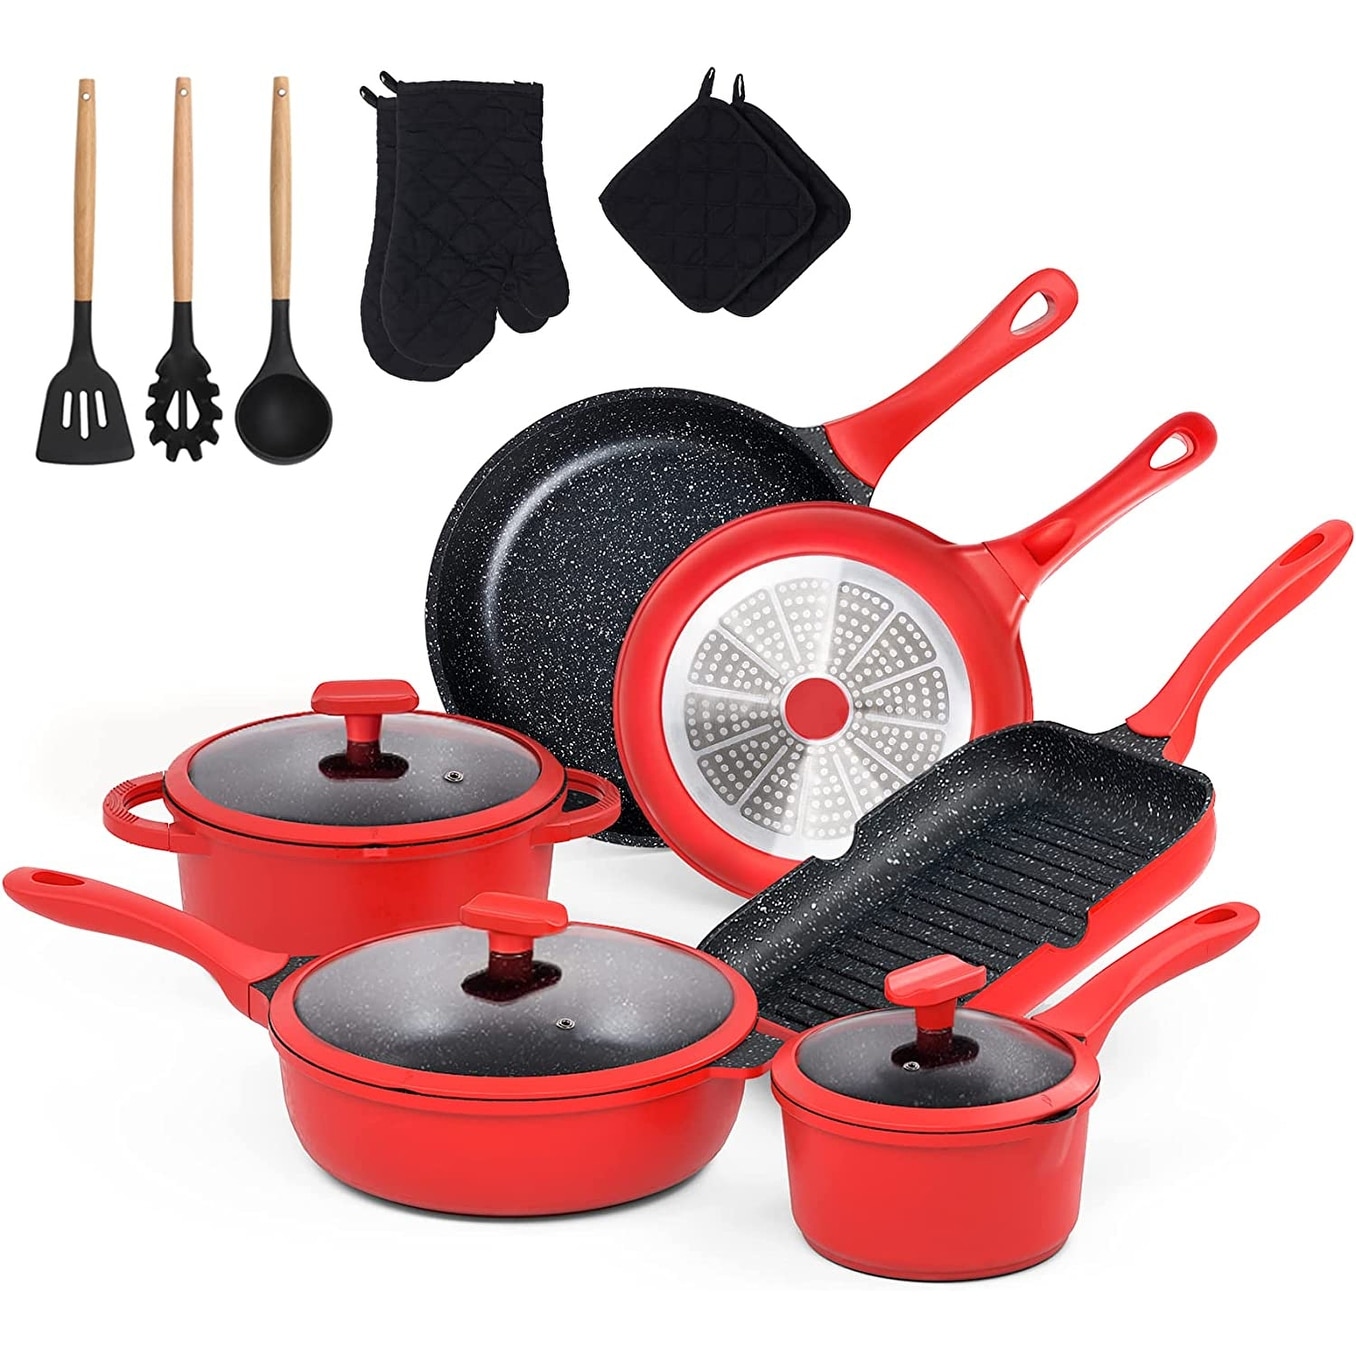 https://ak1.ostkcdn.com/images/products/is/images/direct/0df551b8572f2522662ce8b8e32738671aea17f1/Pots-and-Pans-Set-Nonstick%2C-16-Piece-Nonstick-Kitchen-Cookware-Sets%2C-Easy-Clean-Cooking-Pot-Pan-Set.jpg